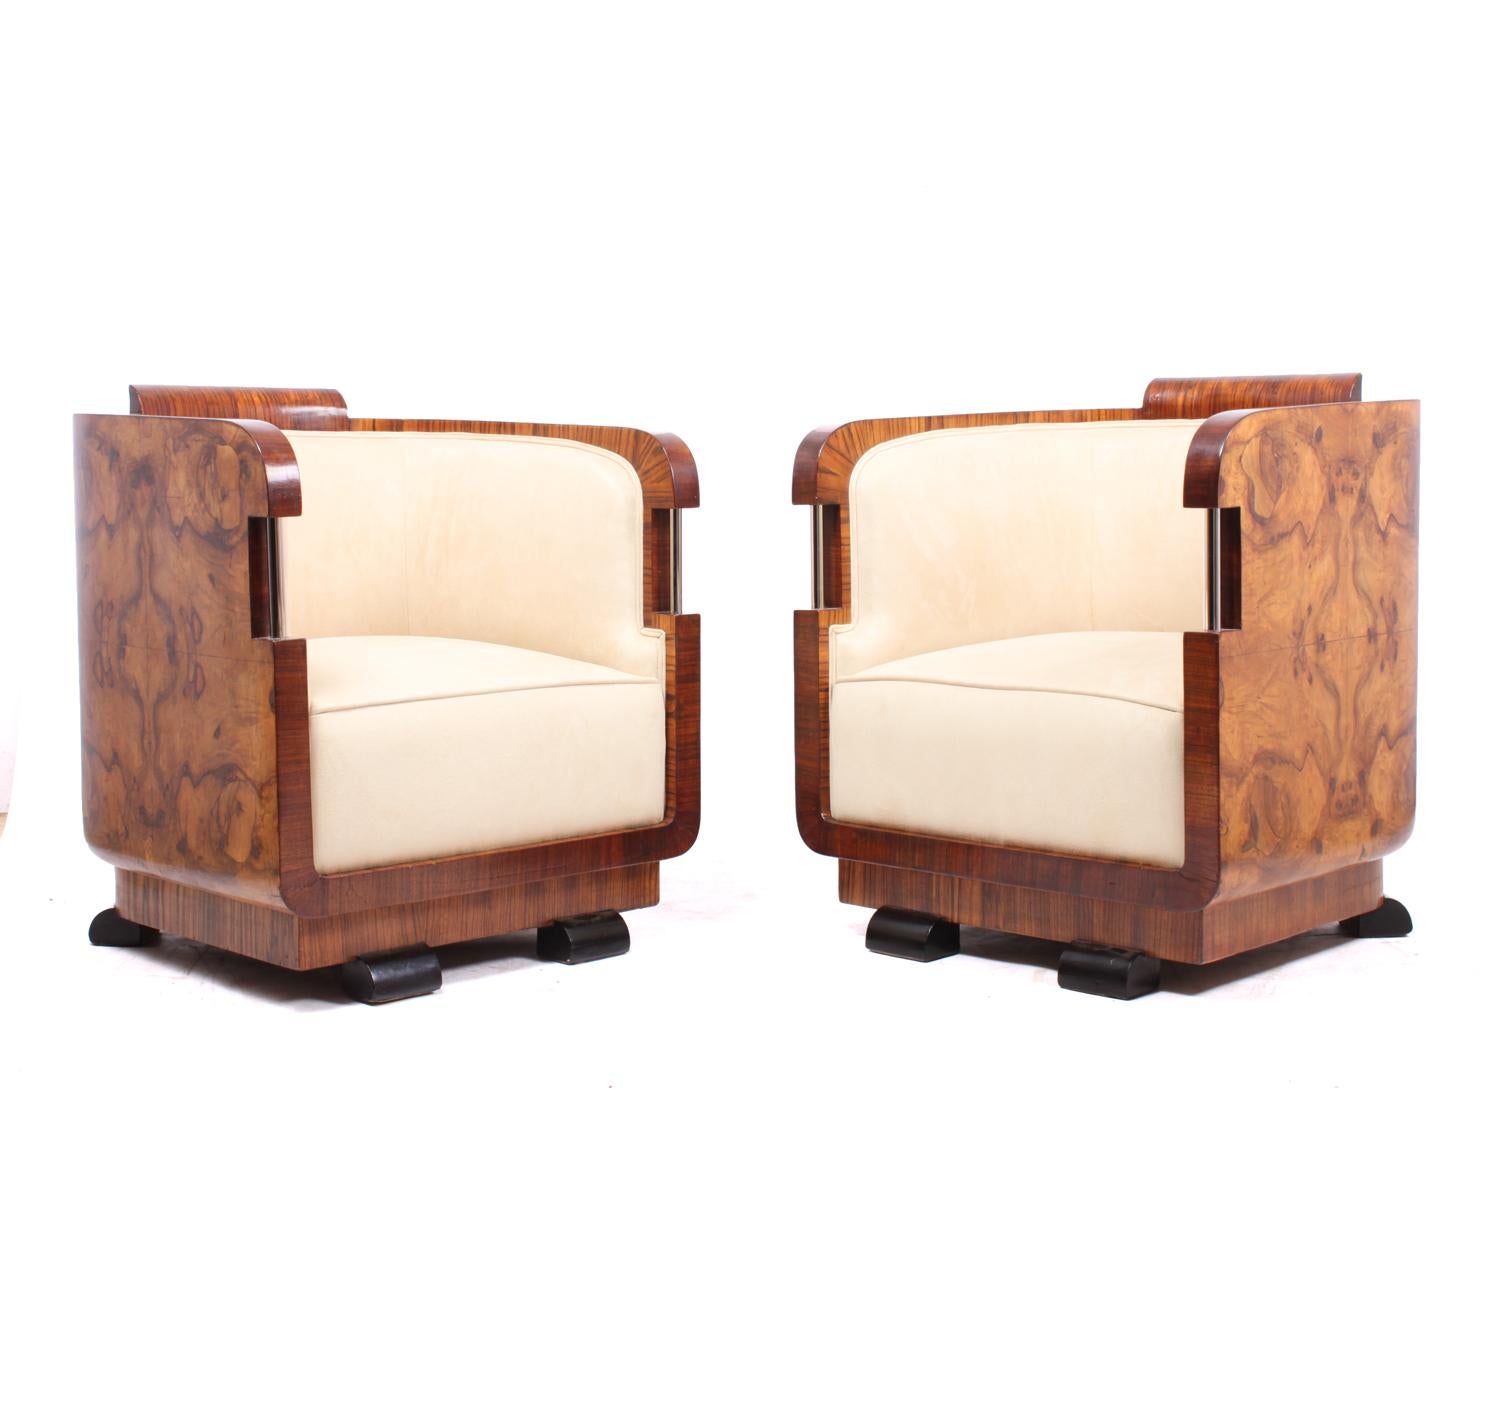 Pair of Italian Art Deco Armchairs and Stools (Art déco)